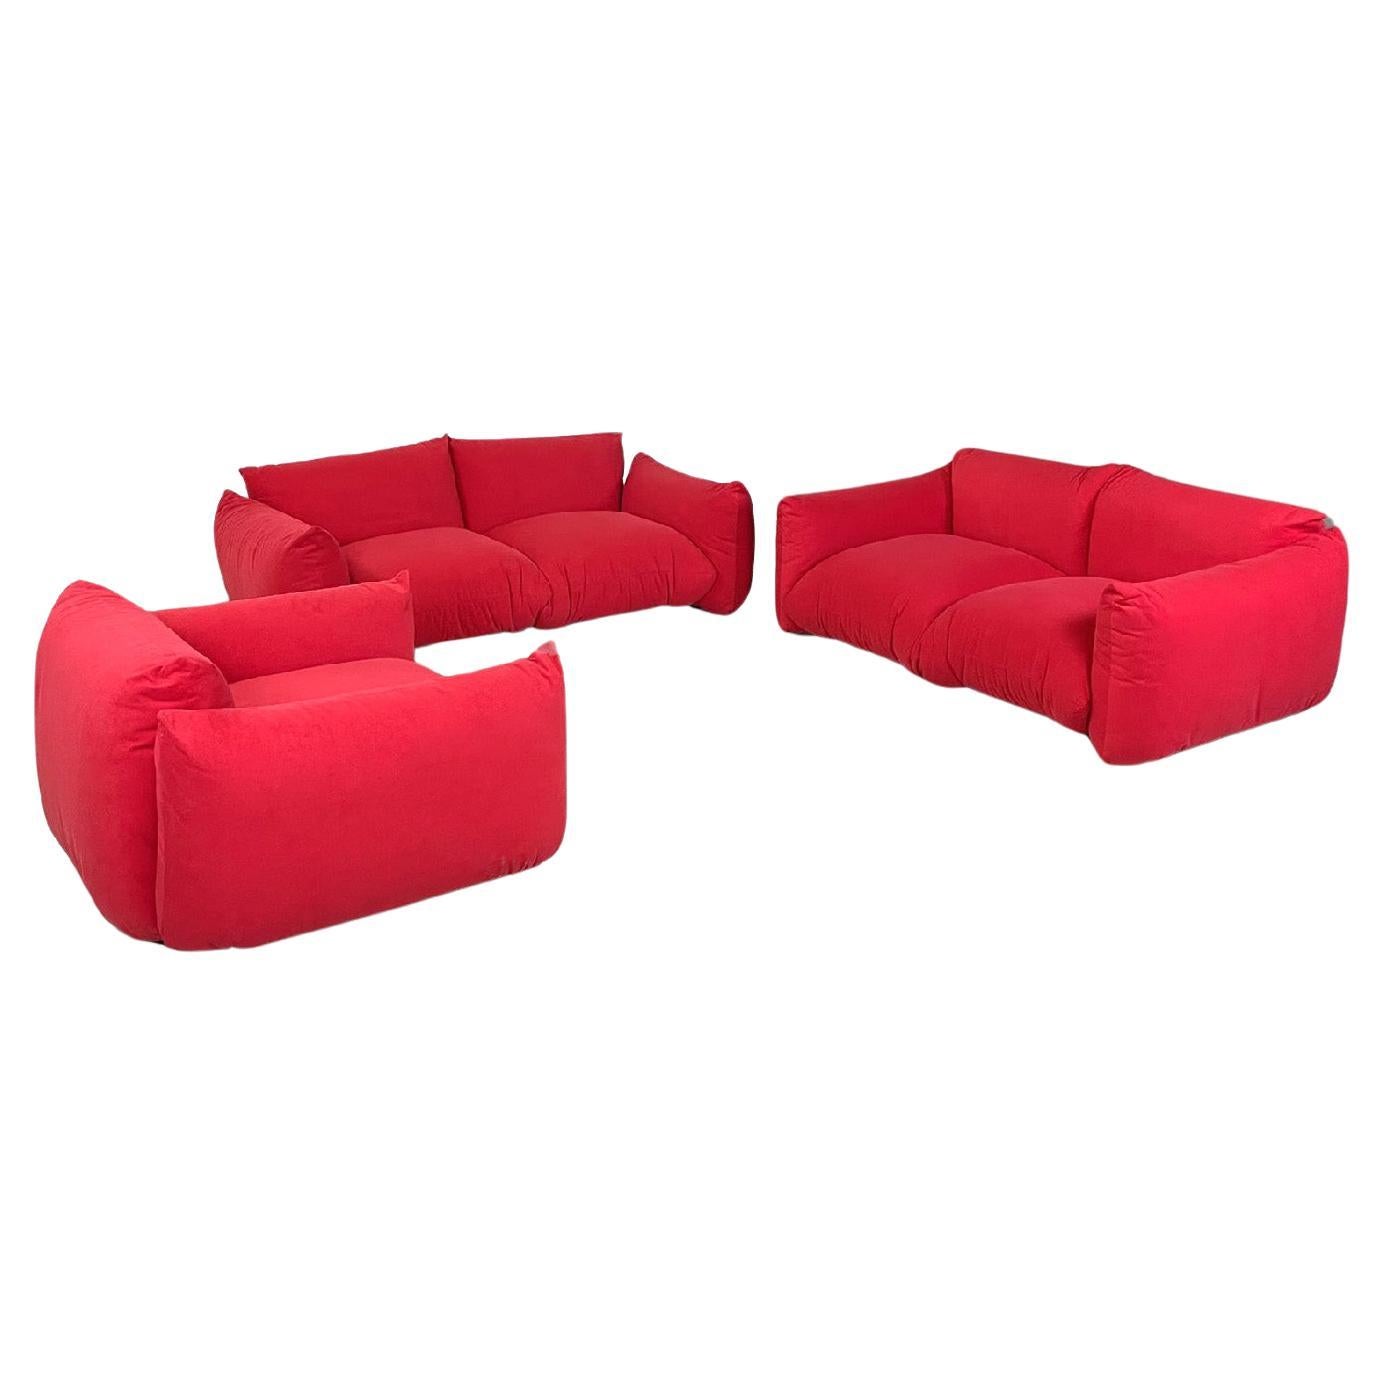 Italian modern red living room Marenco by Mario Marenco for Arflex, 1970s For Sale